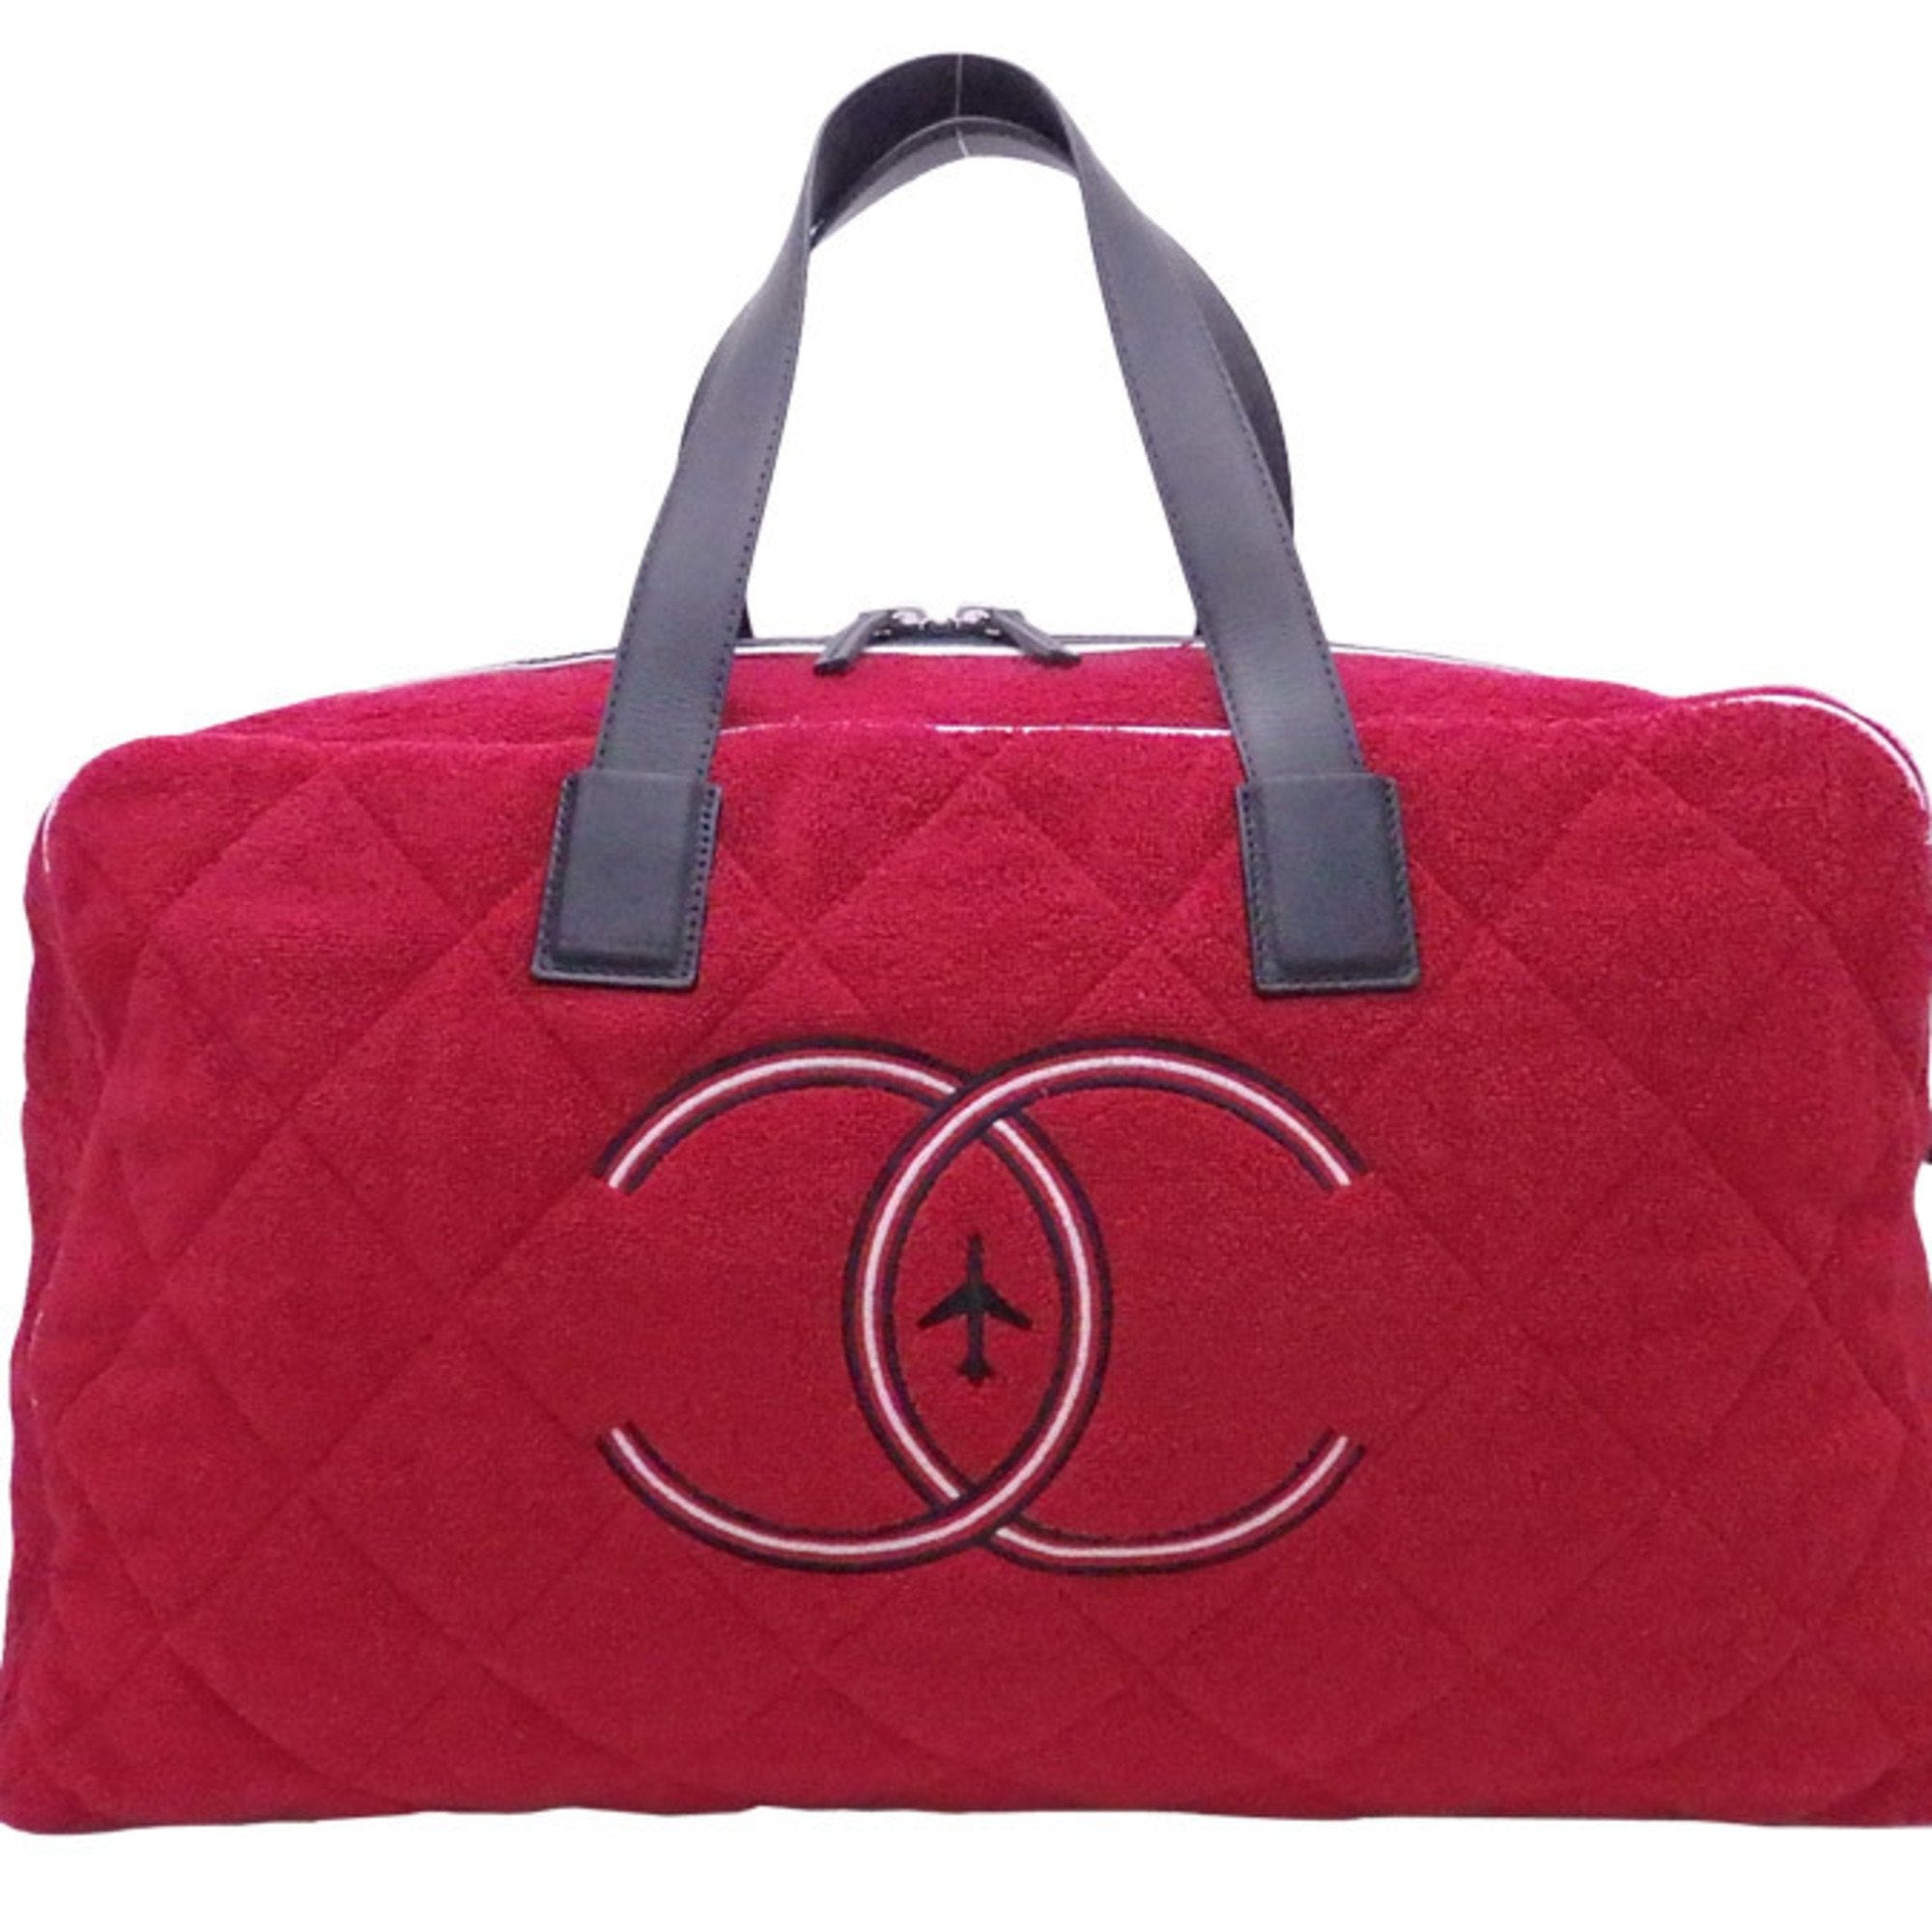 Chanel Handbag Quilted Coco Mark Red Navy Cotton Leather Boston Bag Wo